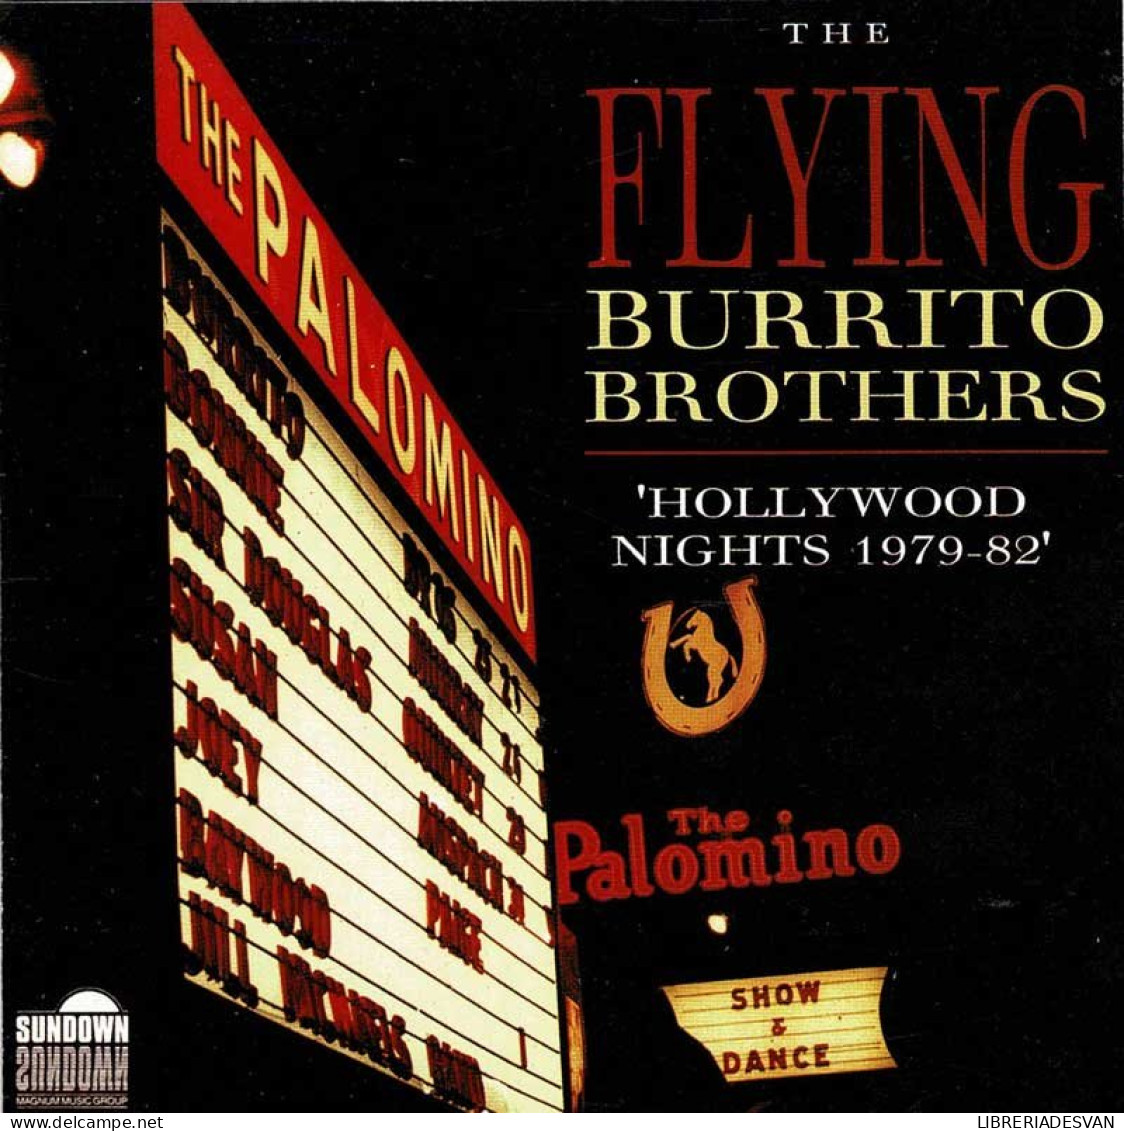 The Flying Burrito Brothers - Hollywood Nights 1979-82. CD - Country En Folk